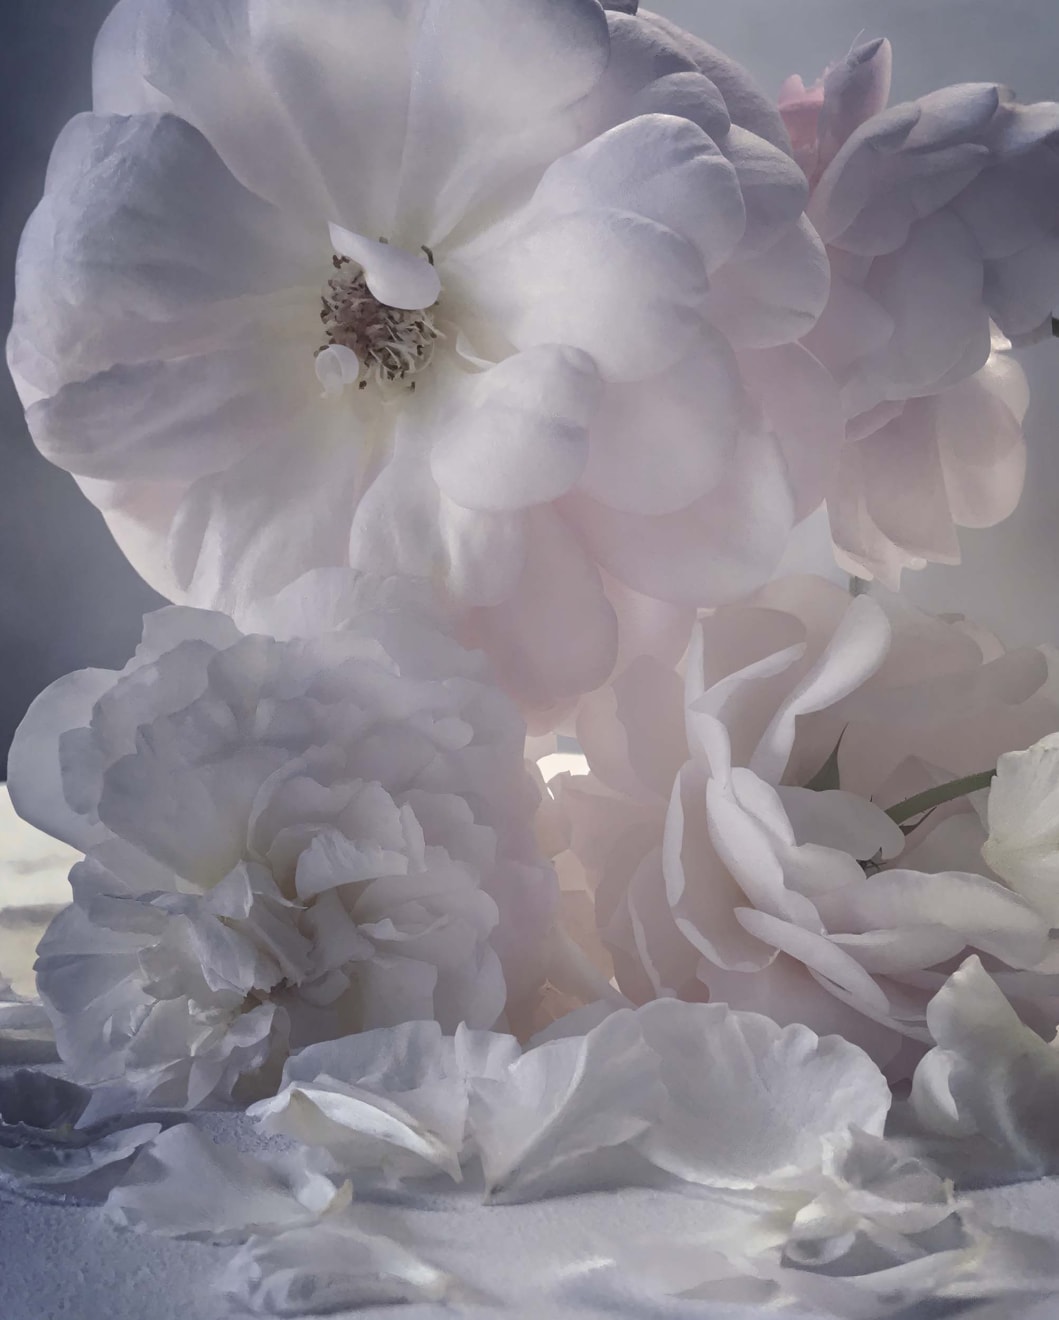 Nick Knight Monday 28th August, 2017, 2019 Hand-coated pigment print (KNI 019)